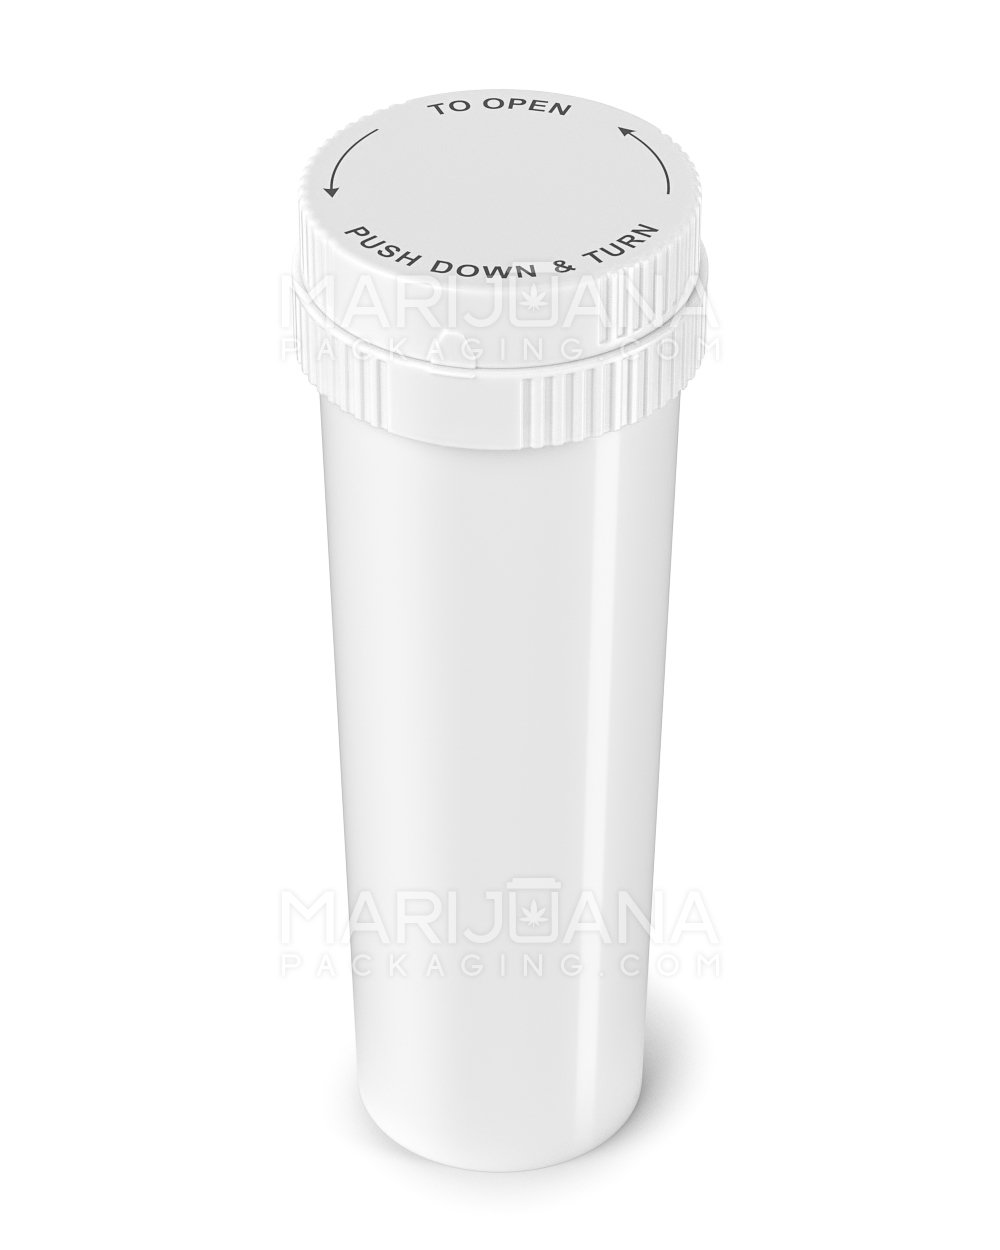 Child Resistant | Push & Turn Vial with Grinder Cap | 60dr - White Plastic - 100 Count - 3